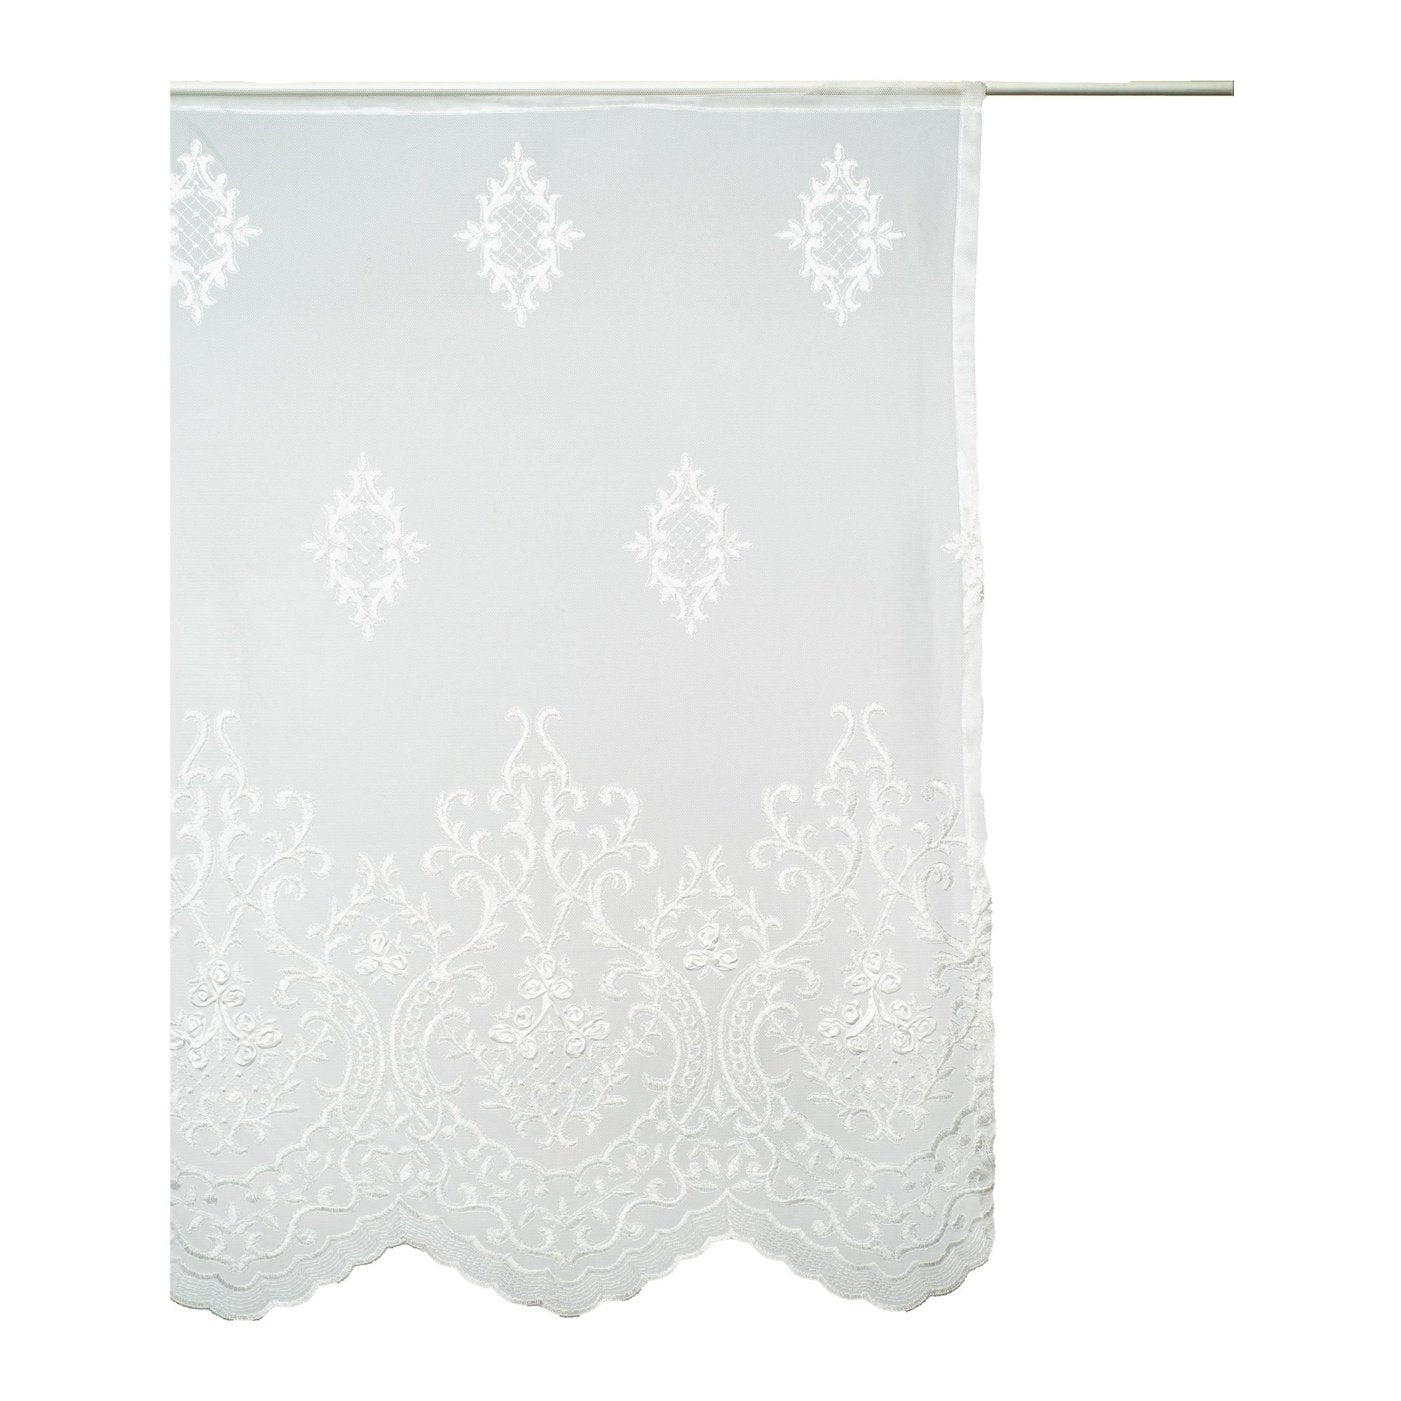 Audrey Lace Curtain: Machine-washable beauty for lasting elegance in your home.